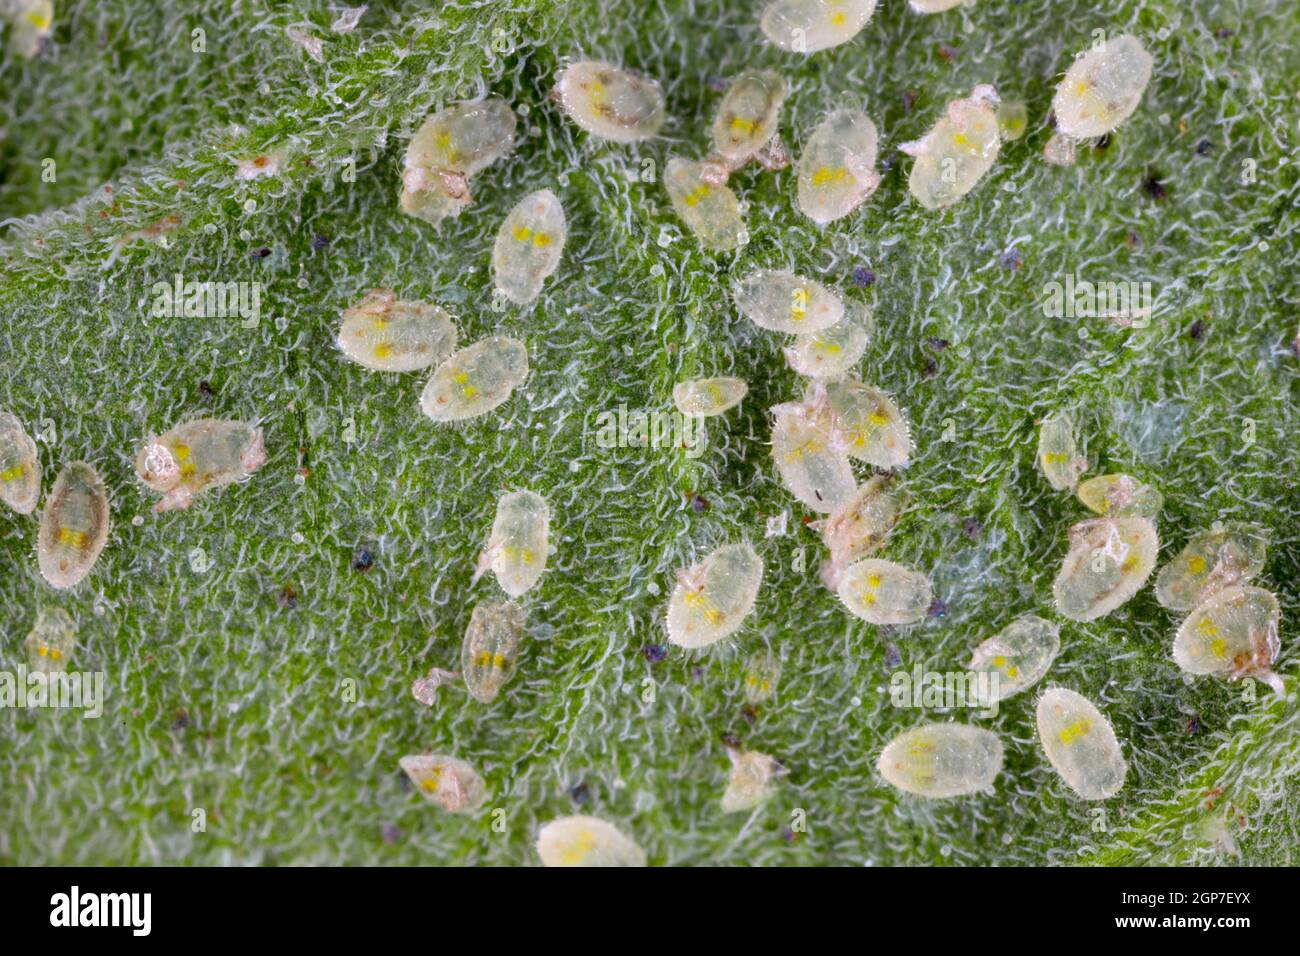 Larvae and pupae of Glasshouse whitefly (Trialeurodes vaporariorum) on the underside of tomato leaves. It is a currently important agricultural pest. Stock Photo